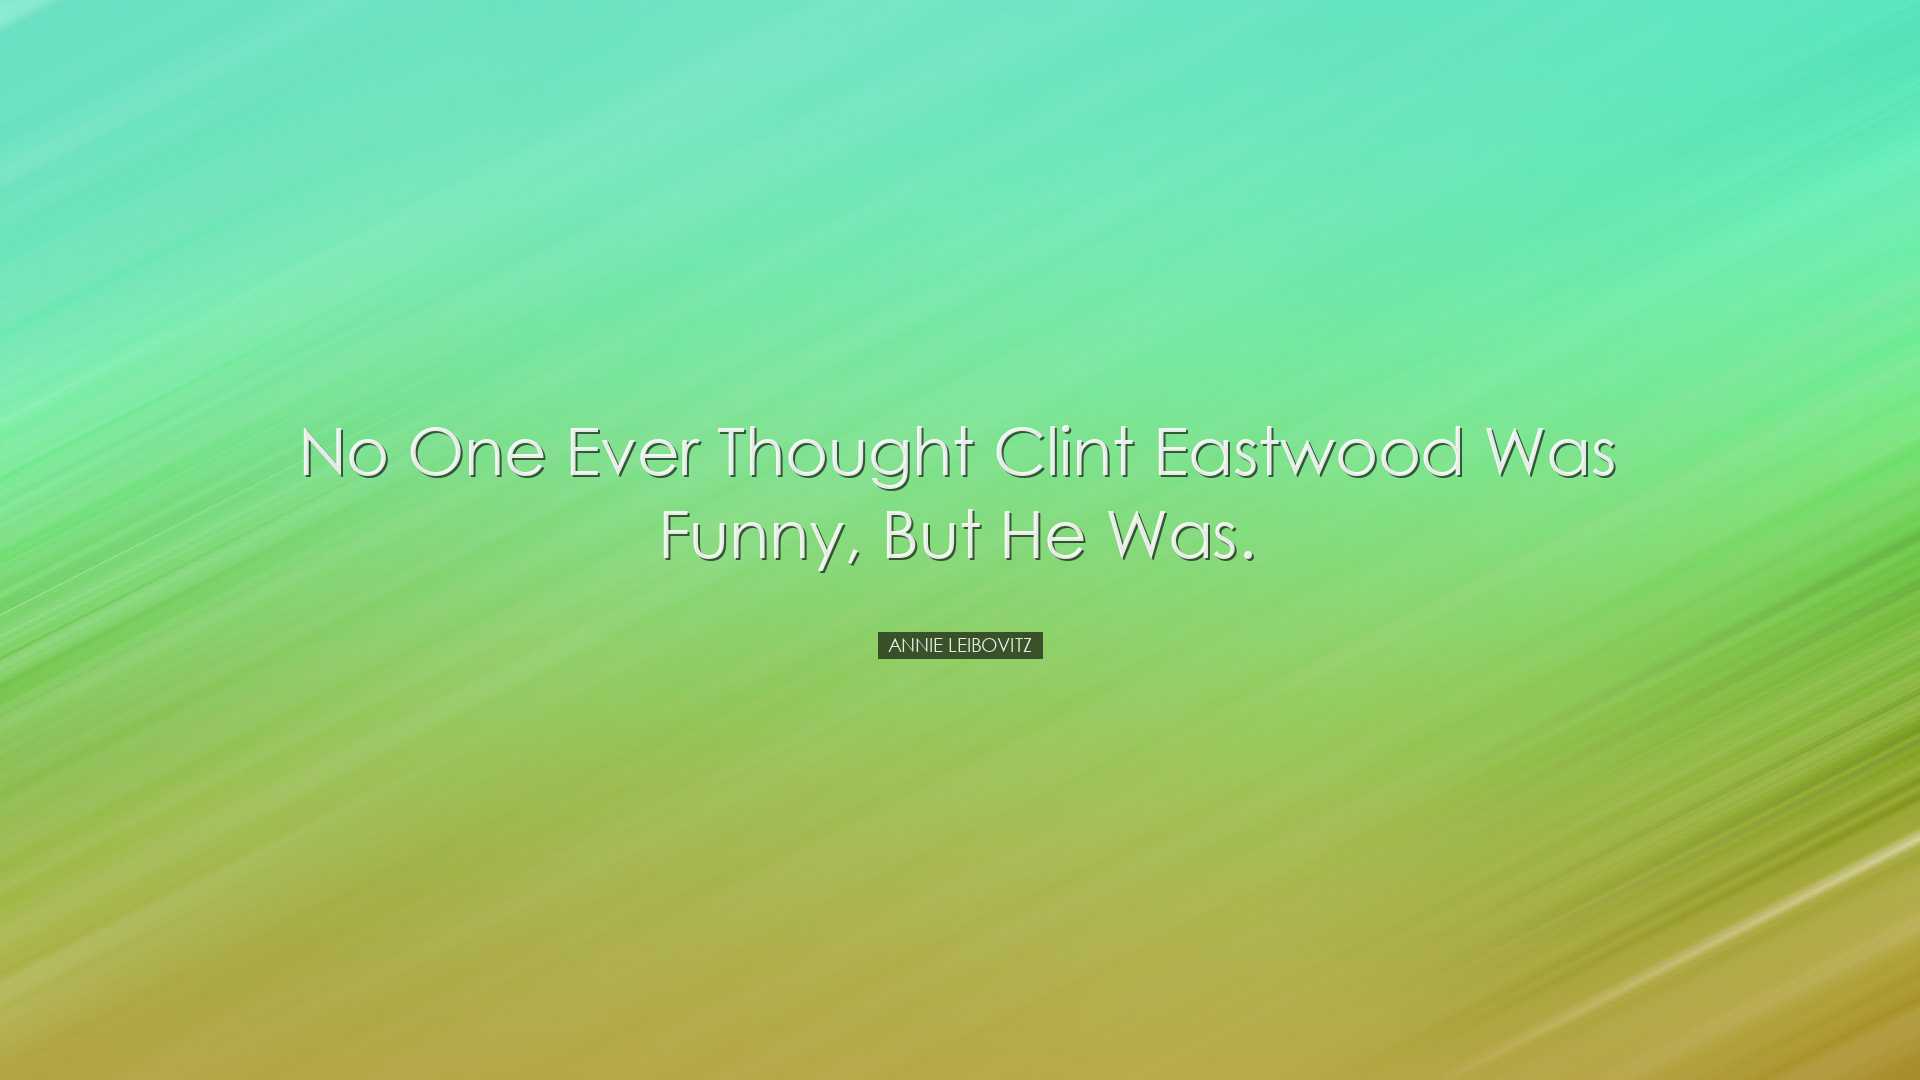 No one ever thought Clint Eastwood was funny, but he was. - Annie